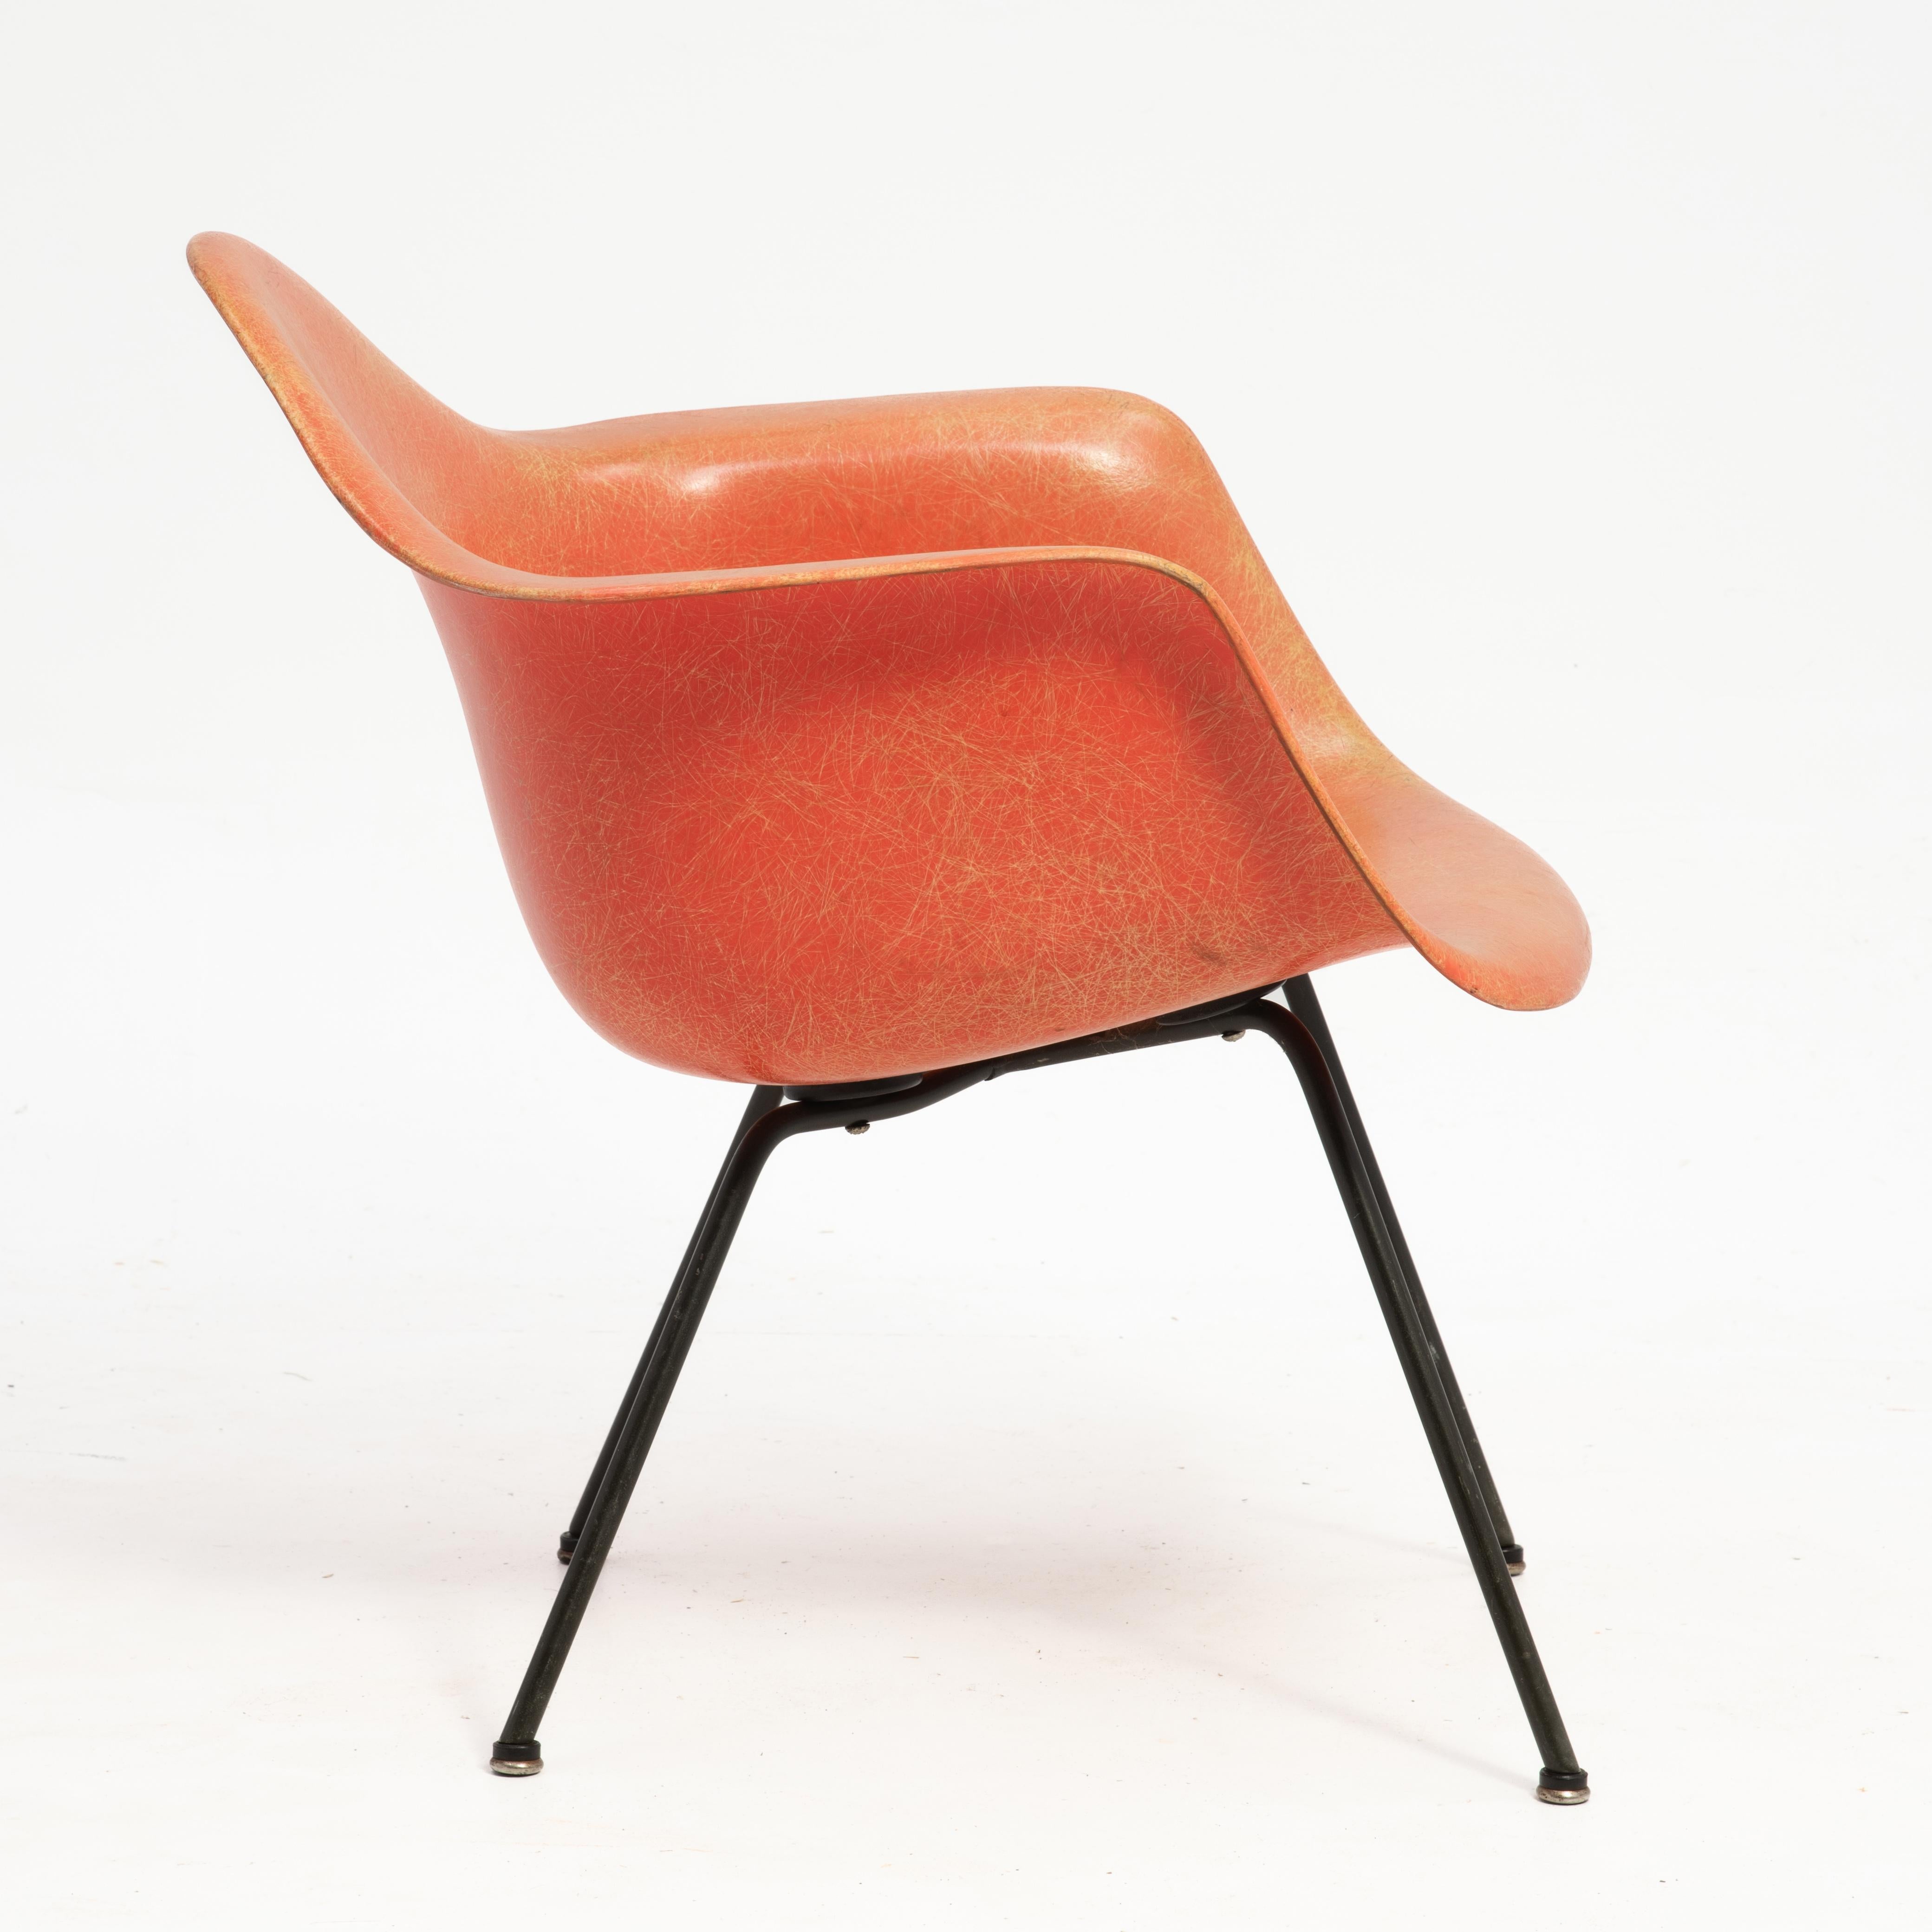 A fabulous Charles & Ray Eames transitional armchair produced by Herman Miller with Zenith Plastics. The salmon colored LAX chair features a rope edge, X base, large shock mounts, boot glides and the checkerboard label. (The checkerboard label was